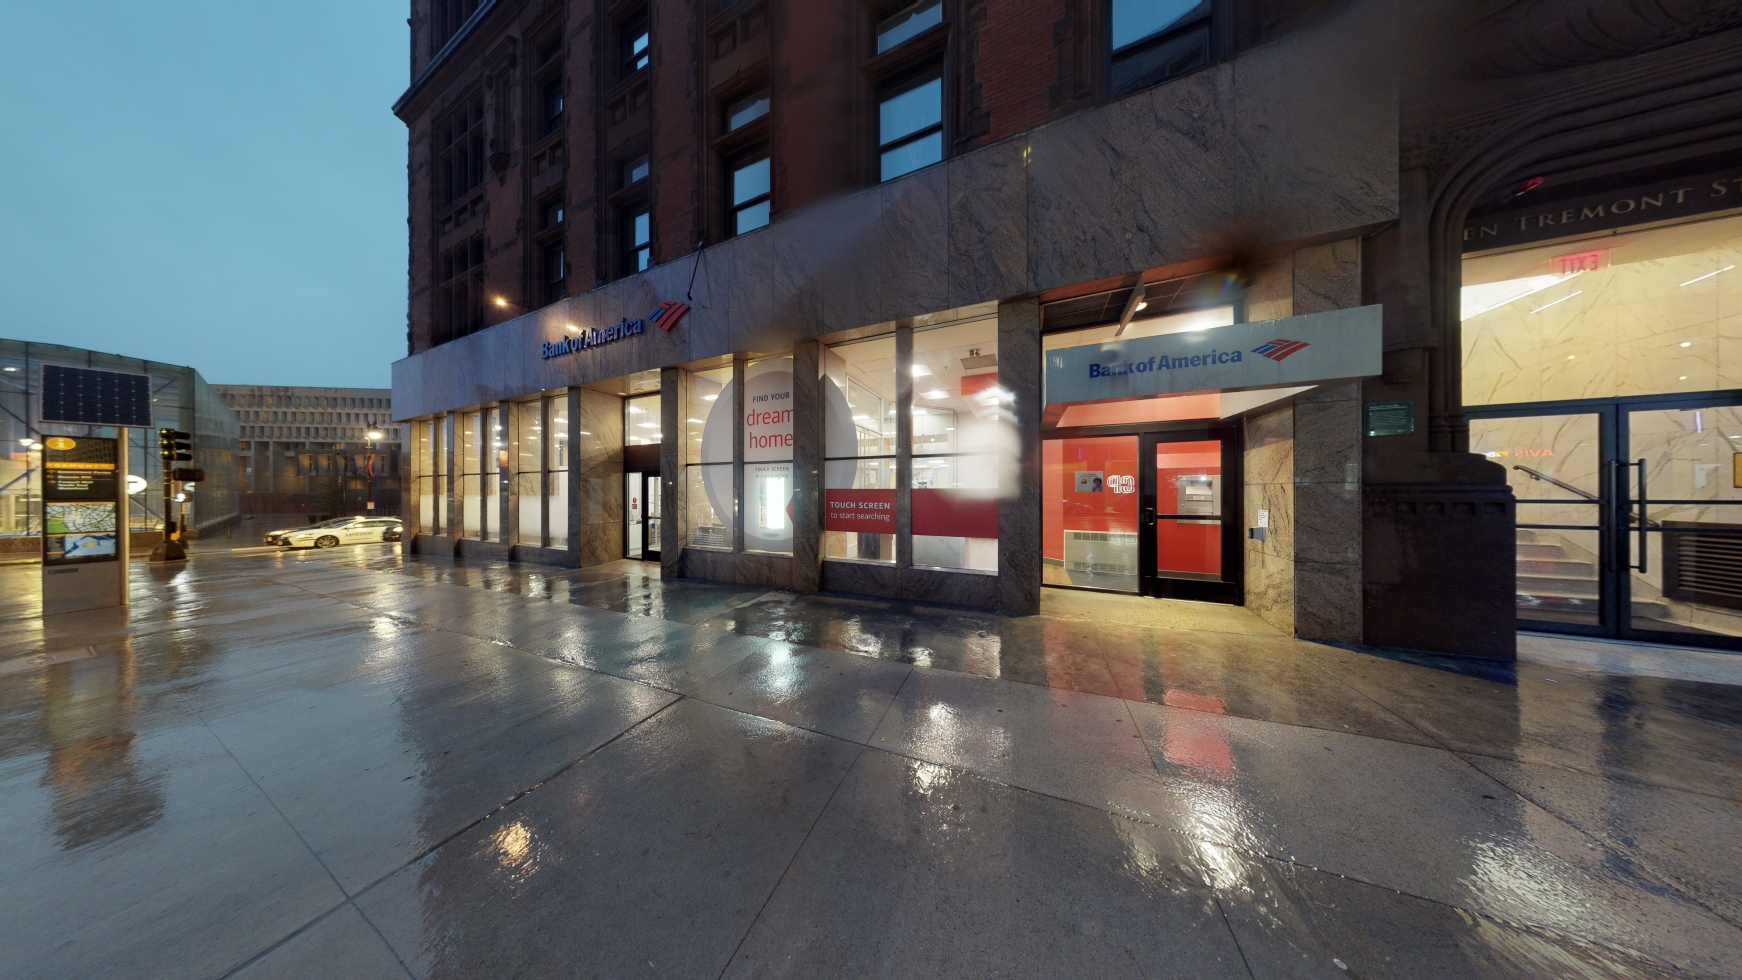 Bank of America financial center with walk-up ATM | 6 Tremont St, Boston, MA 02108